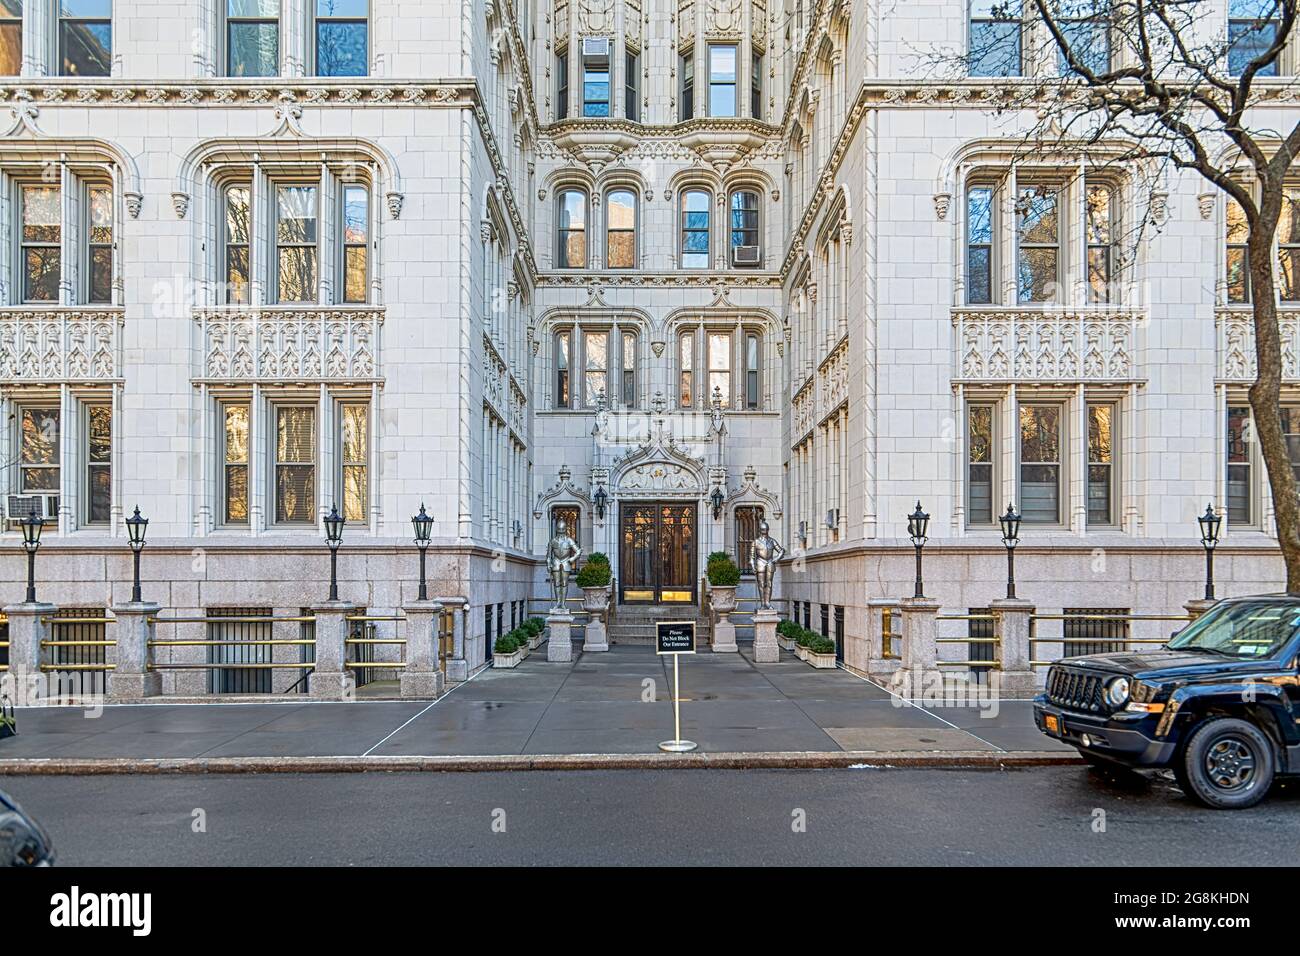 36 Gramercy Park East is a landmark cooperative in the Gramercy Park Historic District. Stock Photo